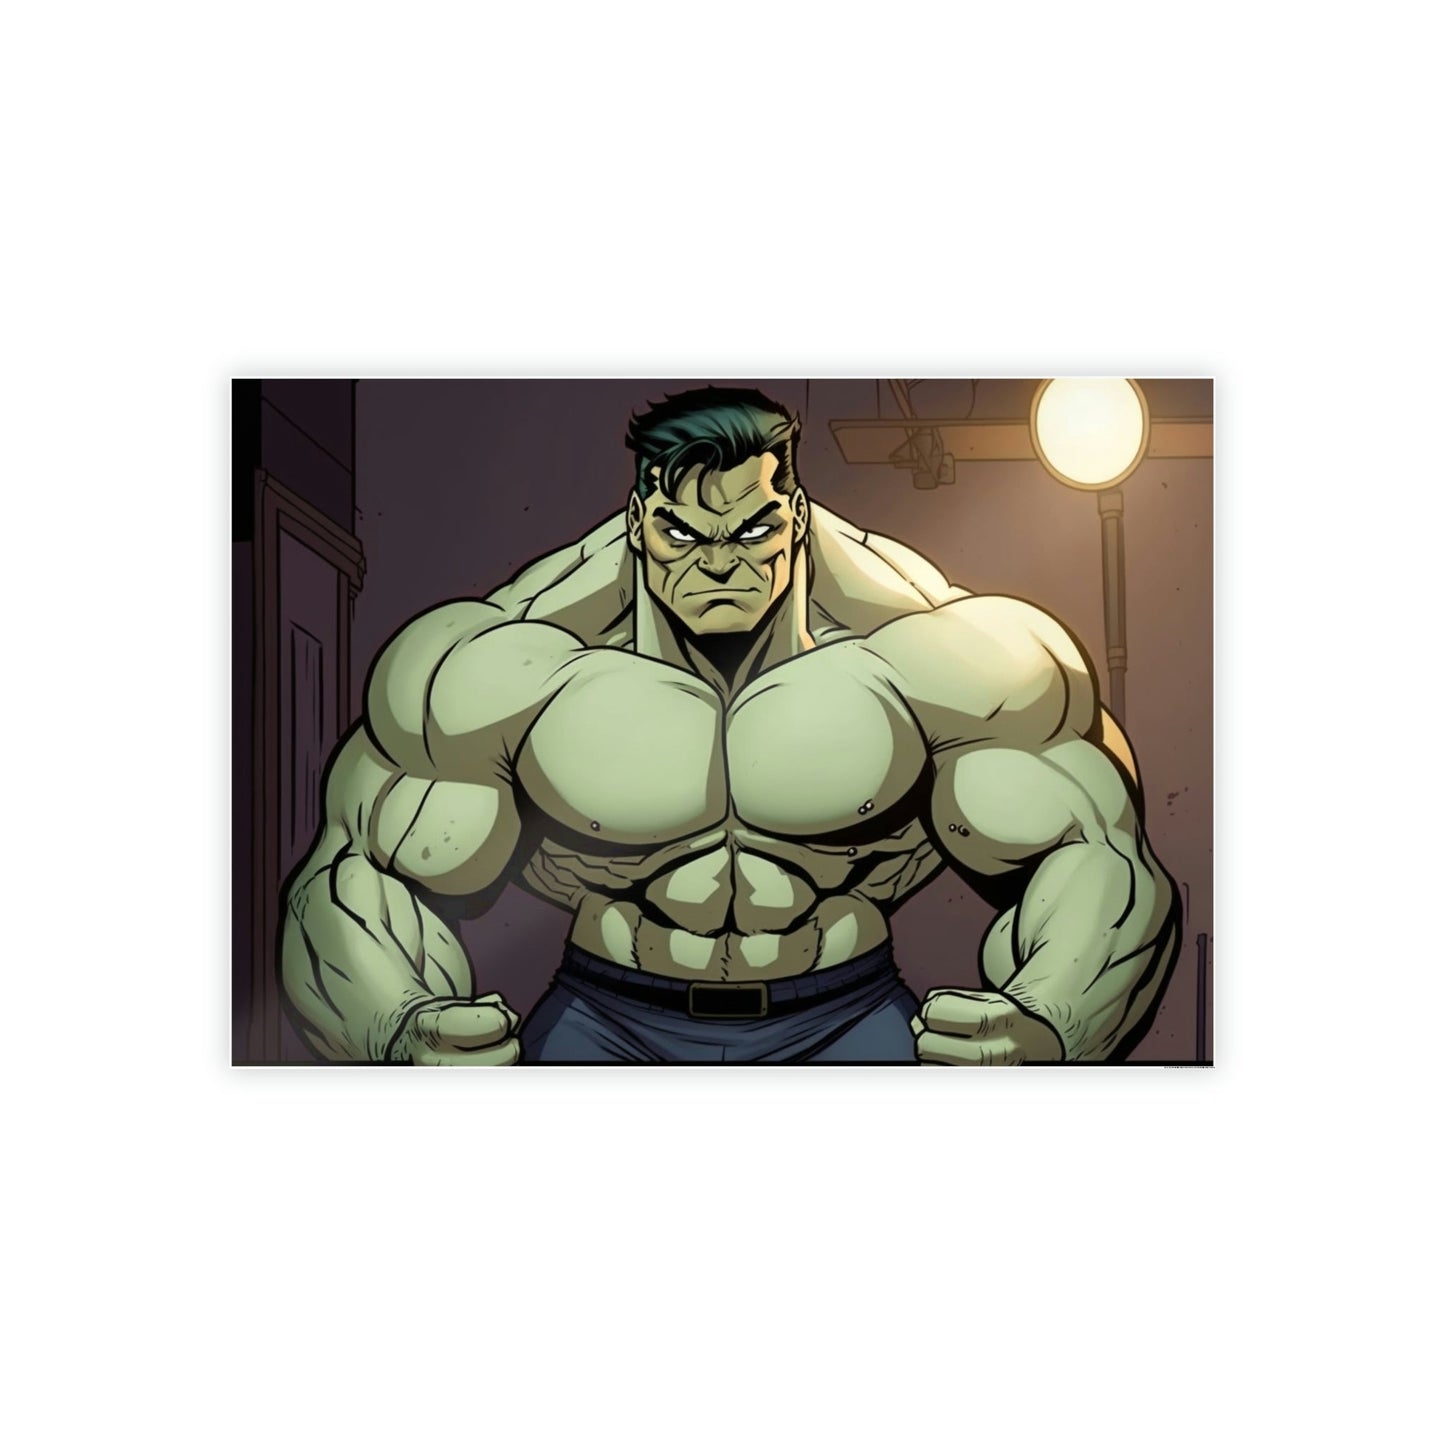 The Incredible Hulk: A Marvelous Force of Nature